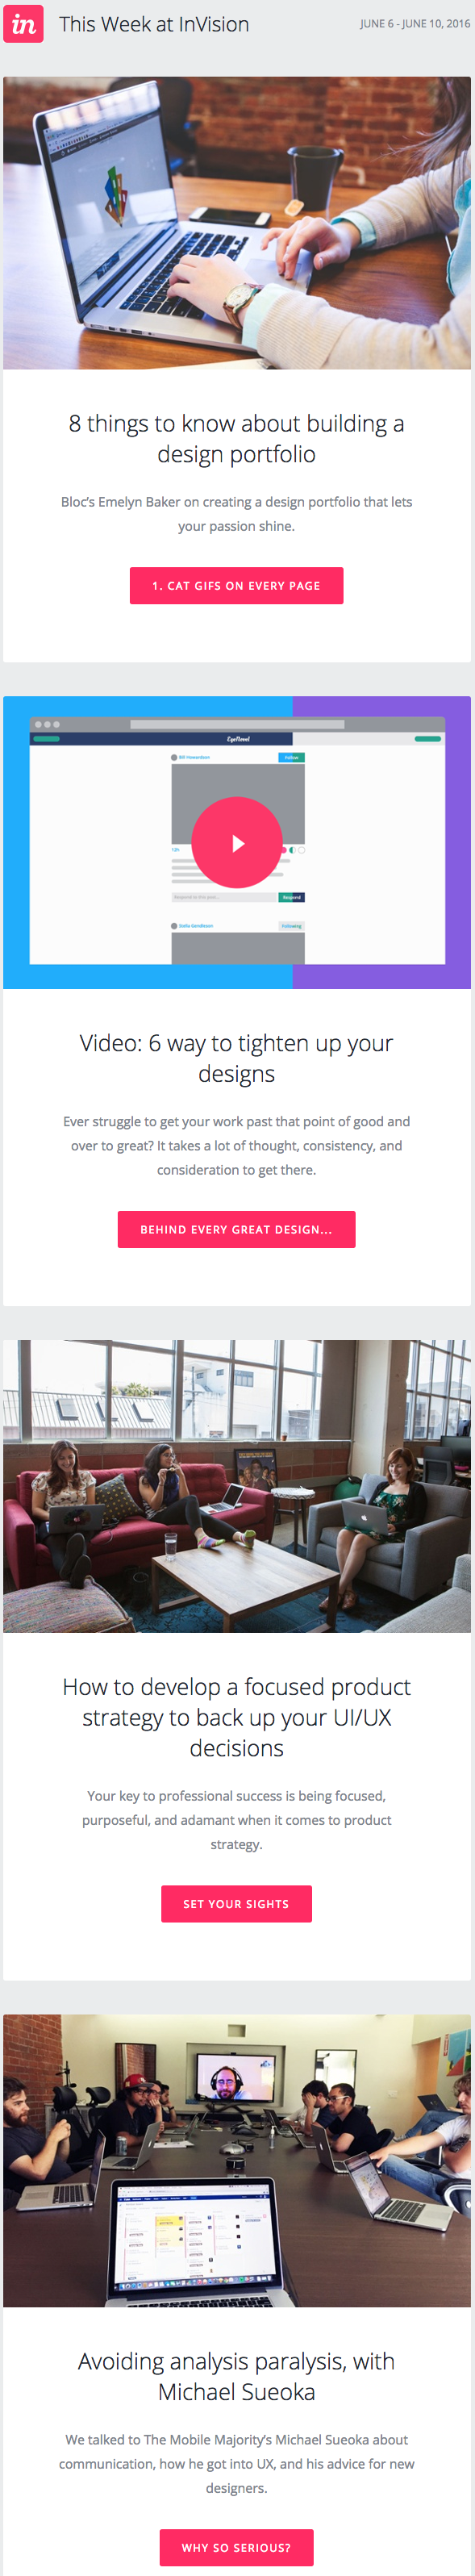 invision-newsletter-example.png